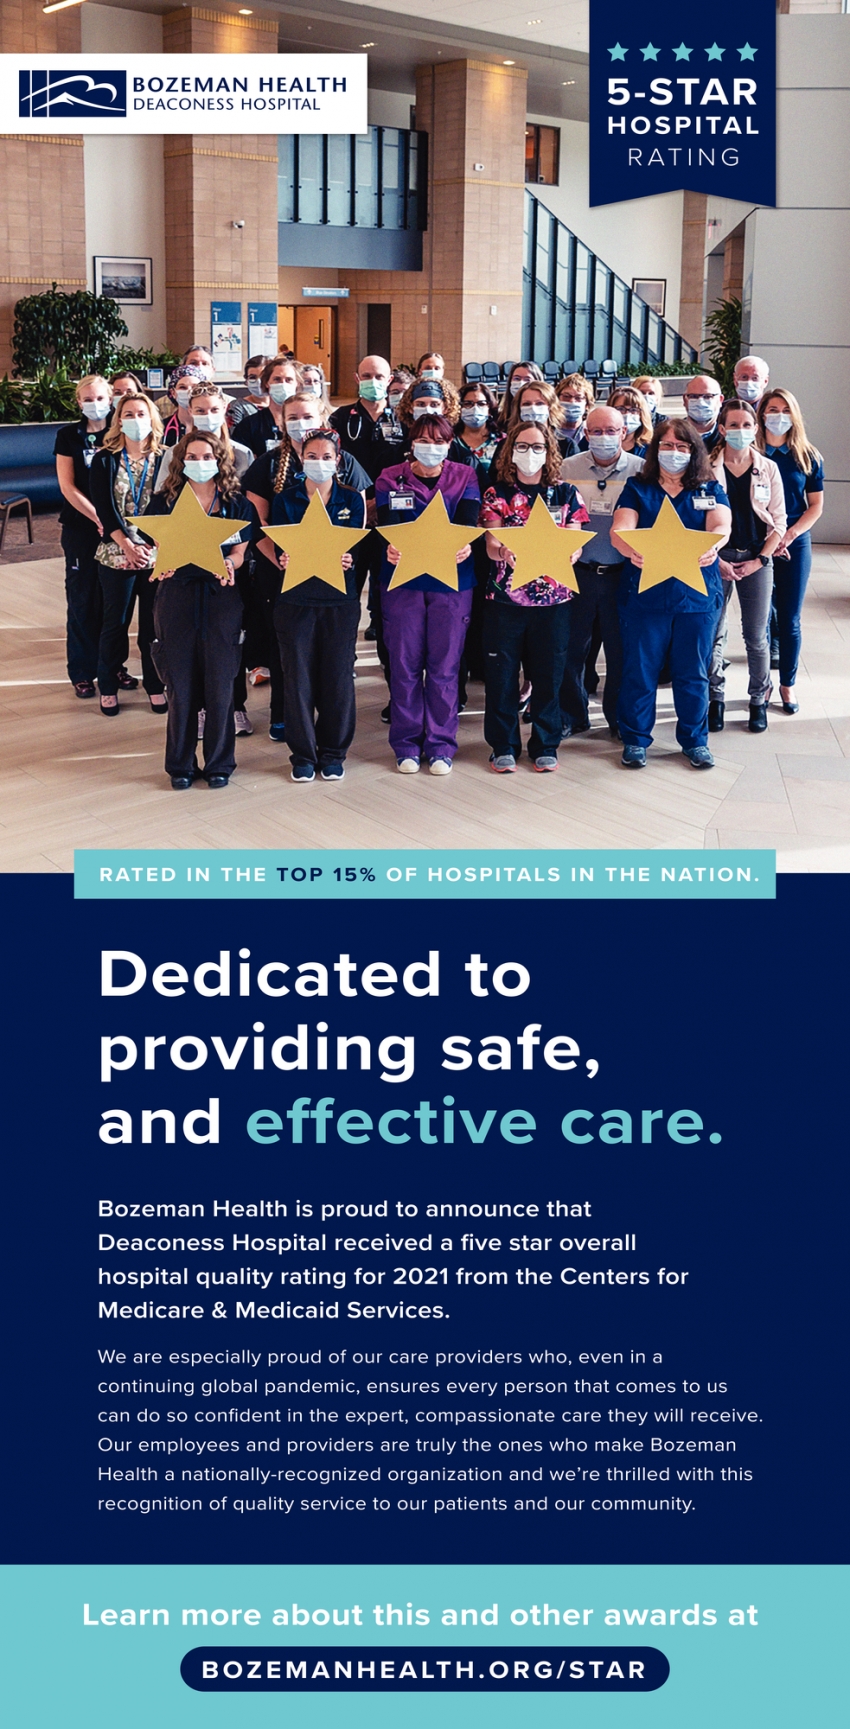 Dedicated To Providing Safe, And Effective Care